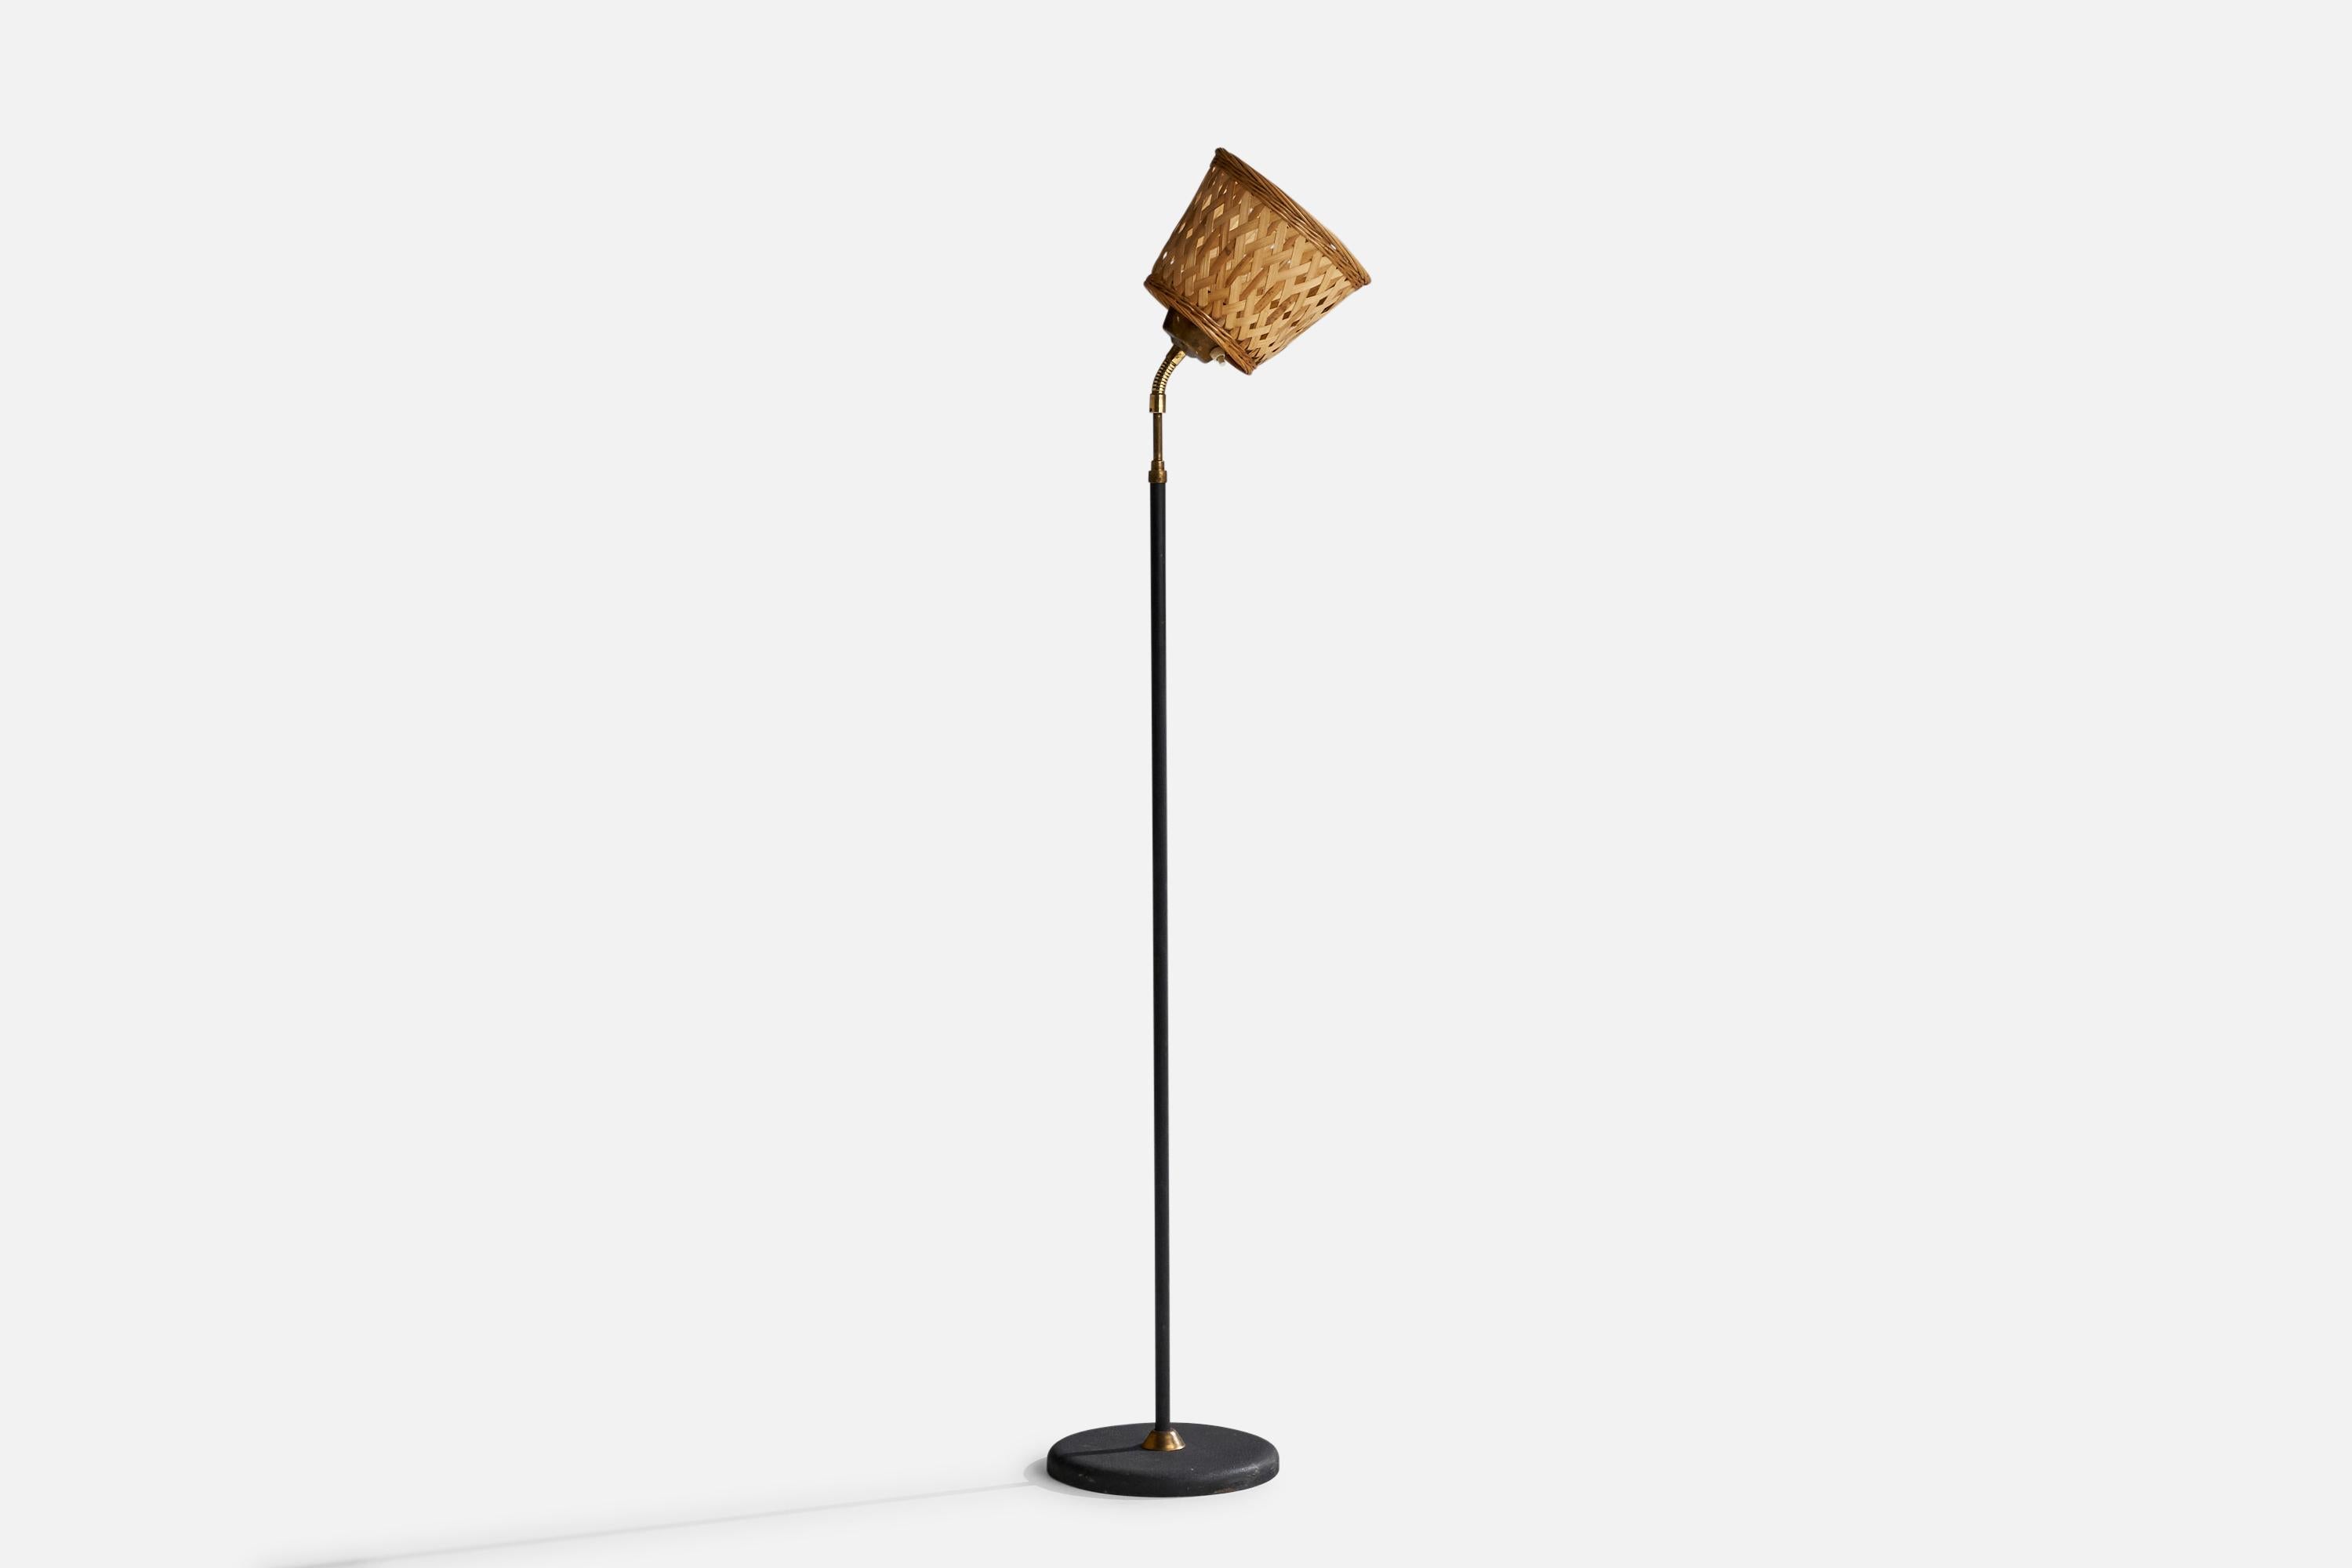 An adjustable brass, metal and rattan floor lamp designed and produced by EWÅ Värnamo, Sweden, 1950s.

Overall Dimensions (inches): 52”  H x 9.5” W x 14” D
Stated dimensions include shade.
Bulb Specifications: E-26 Bulb
Number of Sockets: 1
All